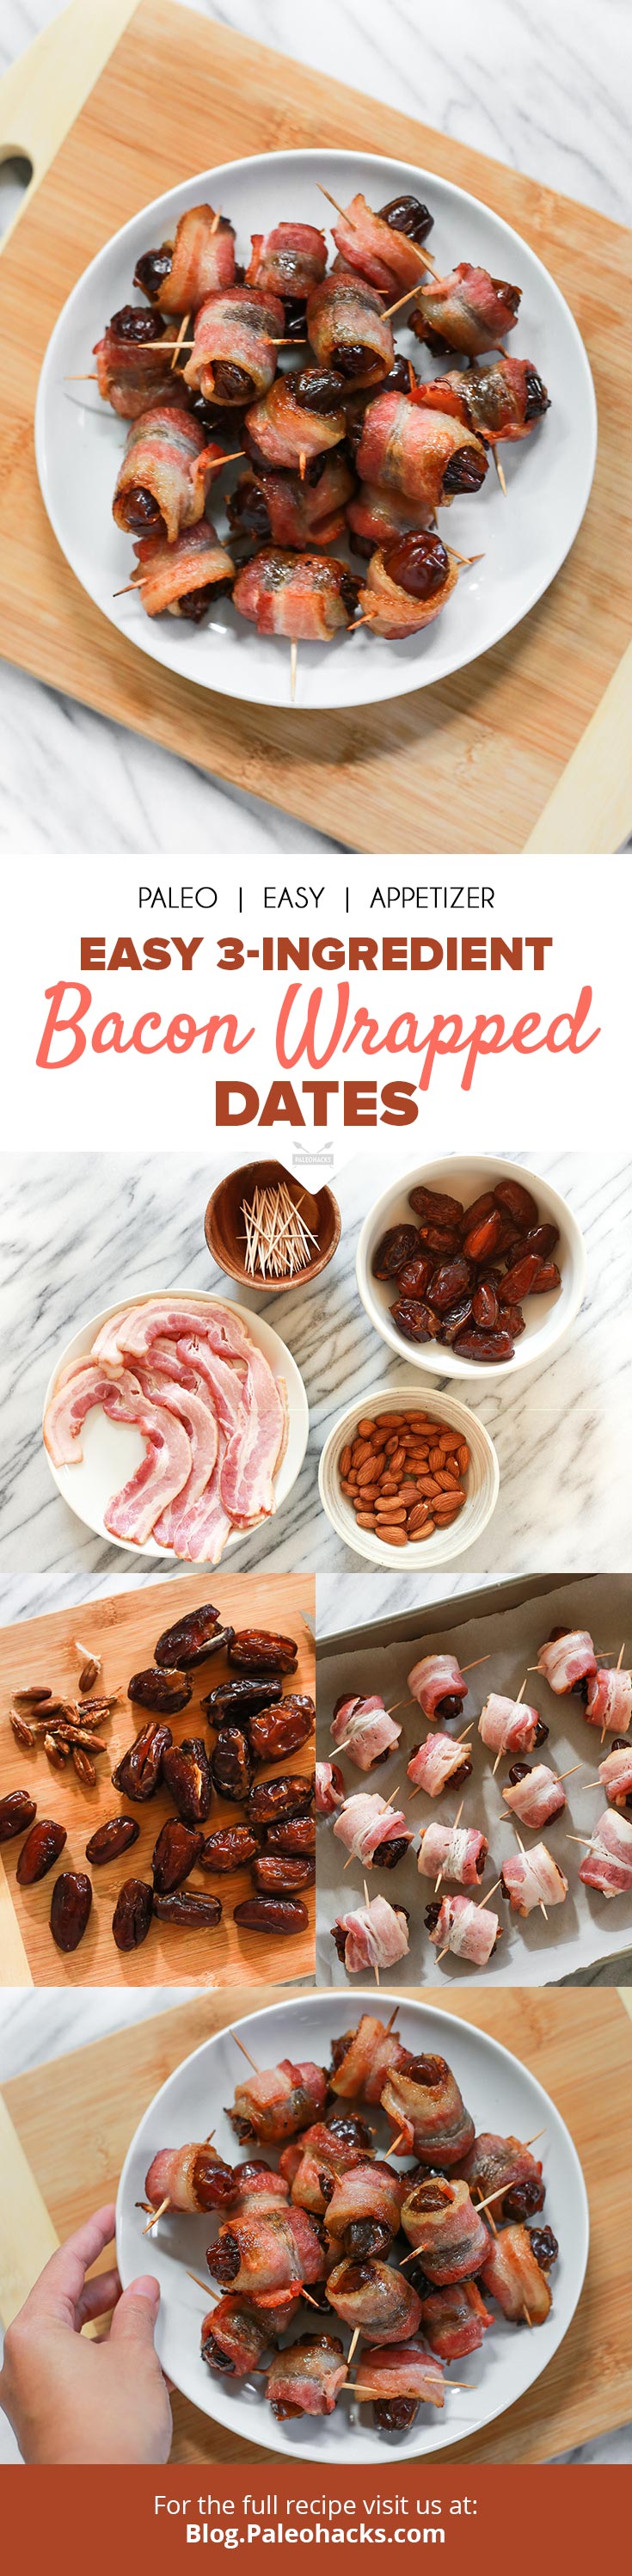 Savory bacon wrapped dates are stuffed with almonds and roasted in the oven for a classic sweet and salty appetizer on a stick.